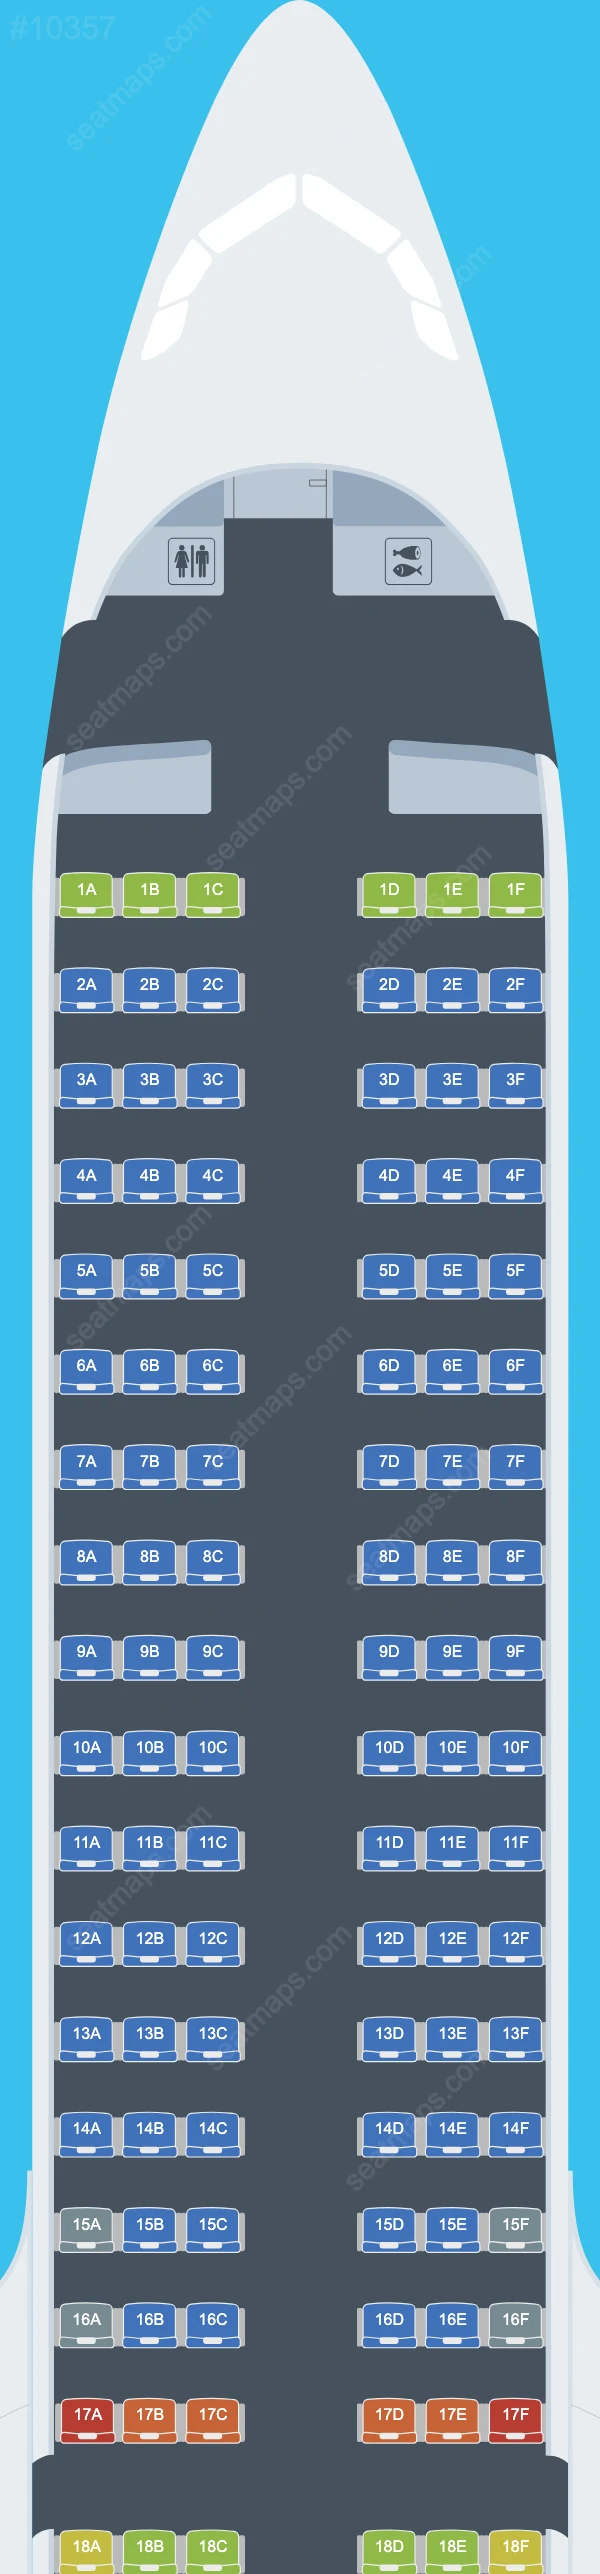 AirBlue Airbus A321-200neo seatmap mobile preview